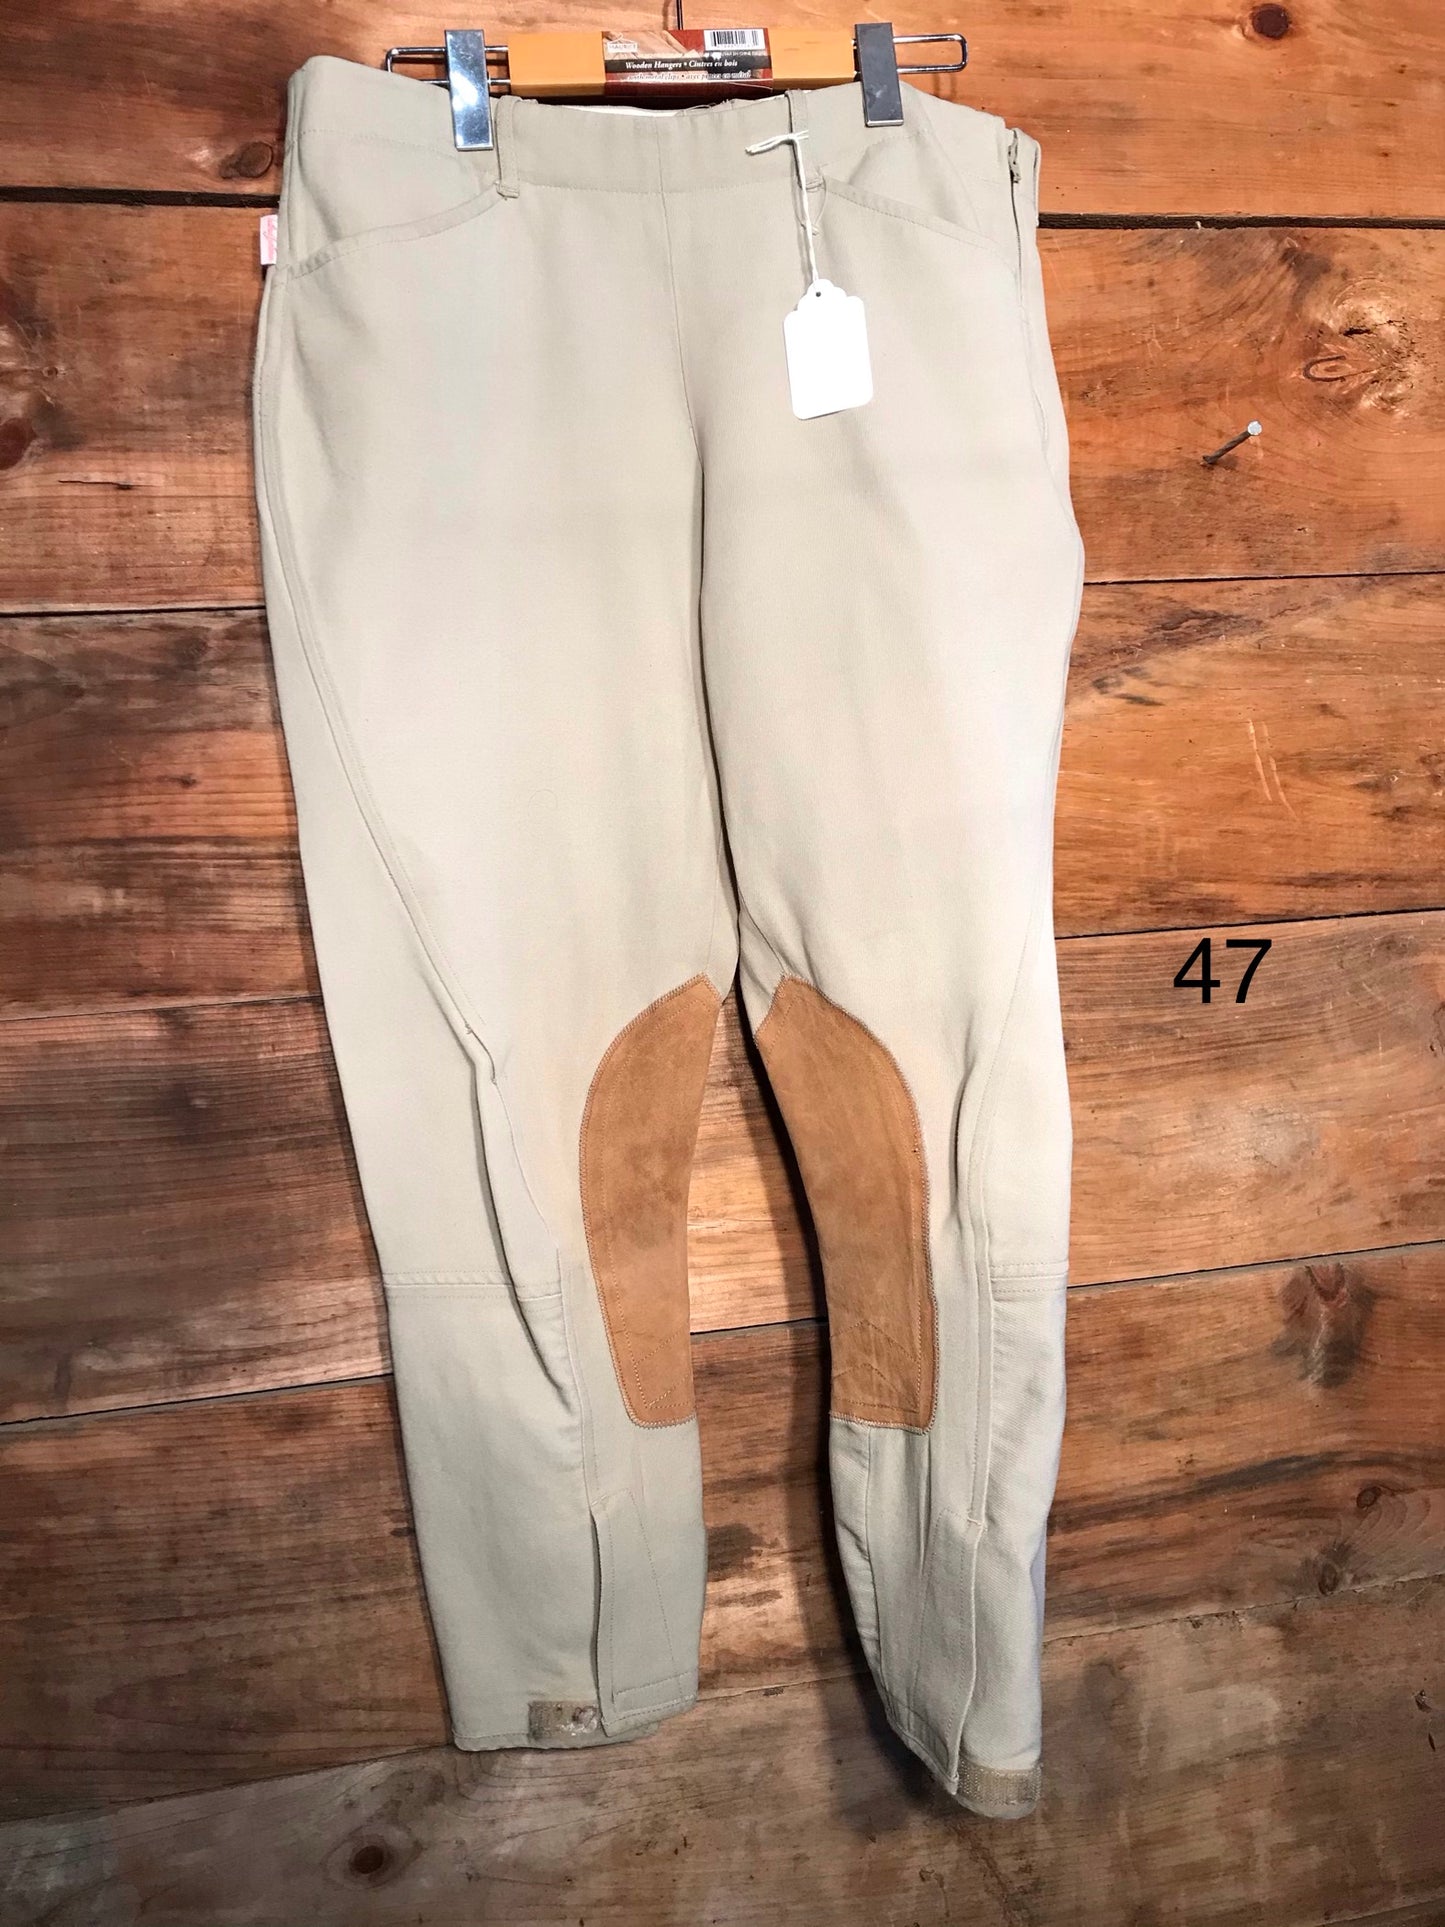 Tailored sportsman size 34